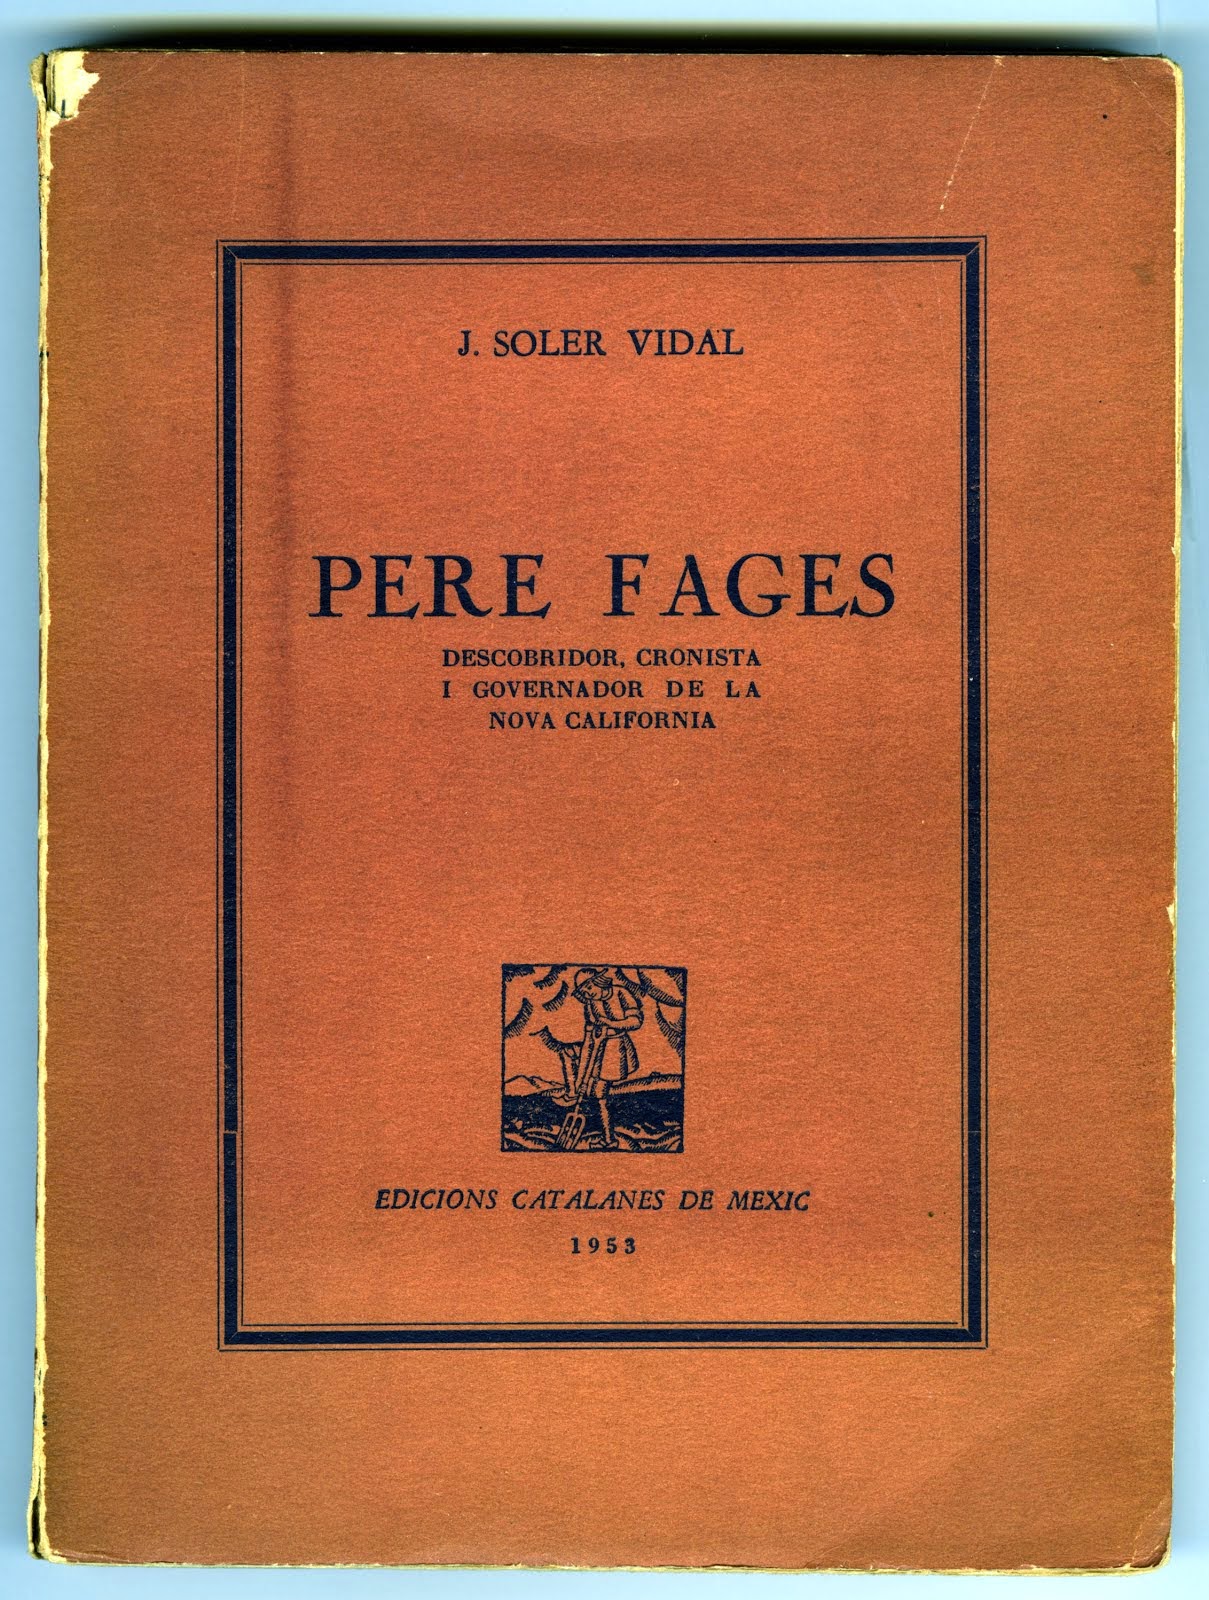 Pere Fages